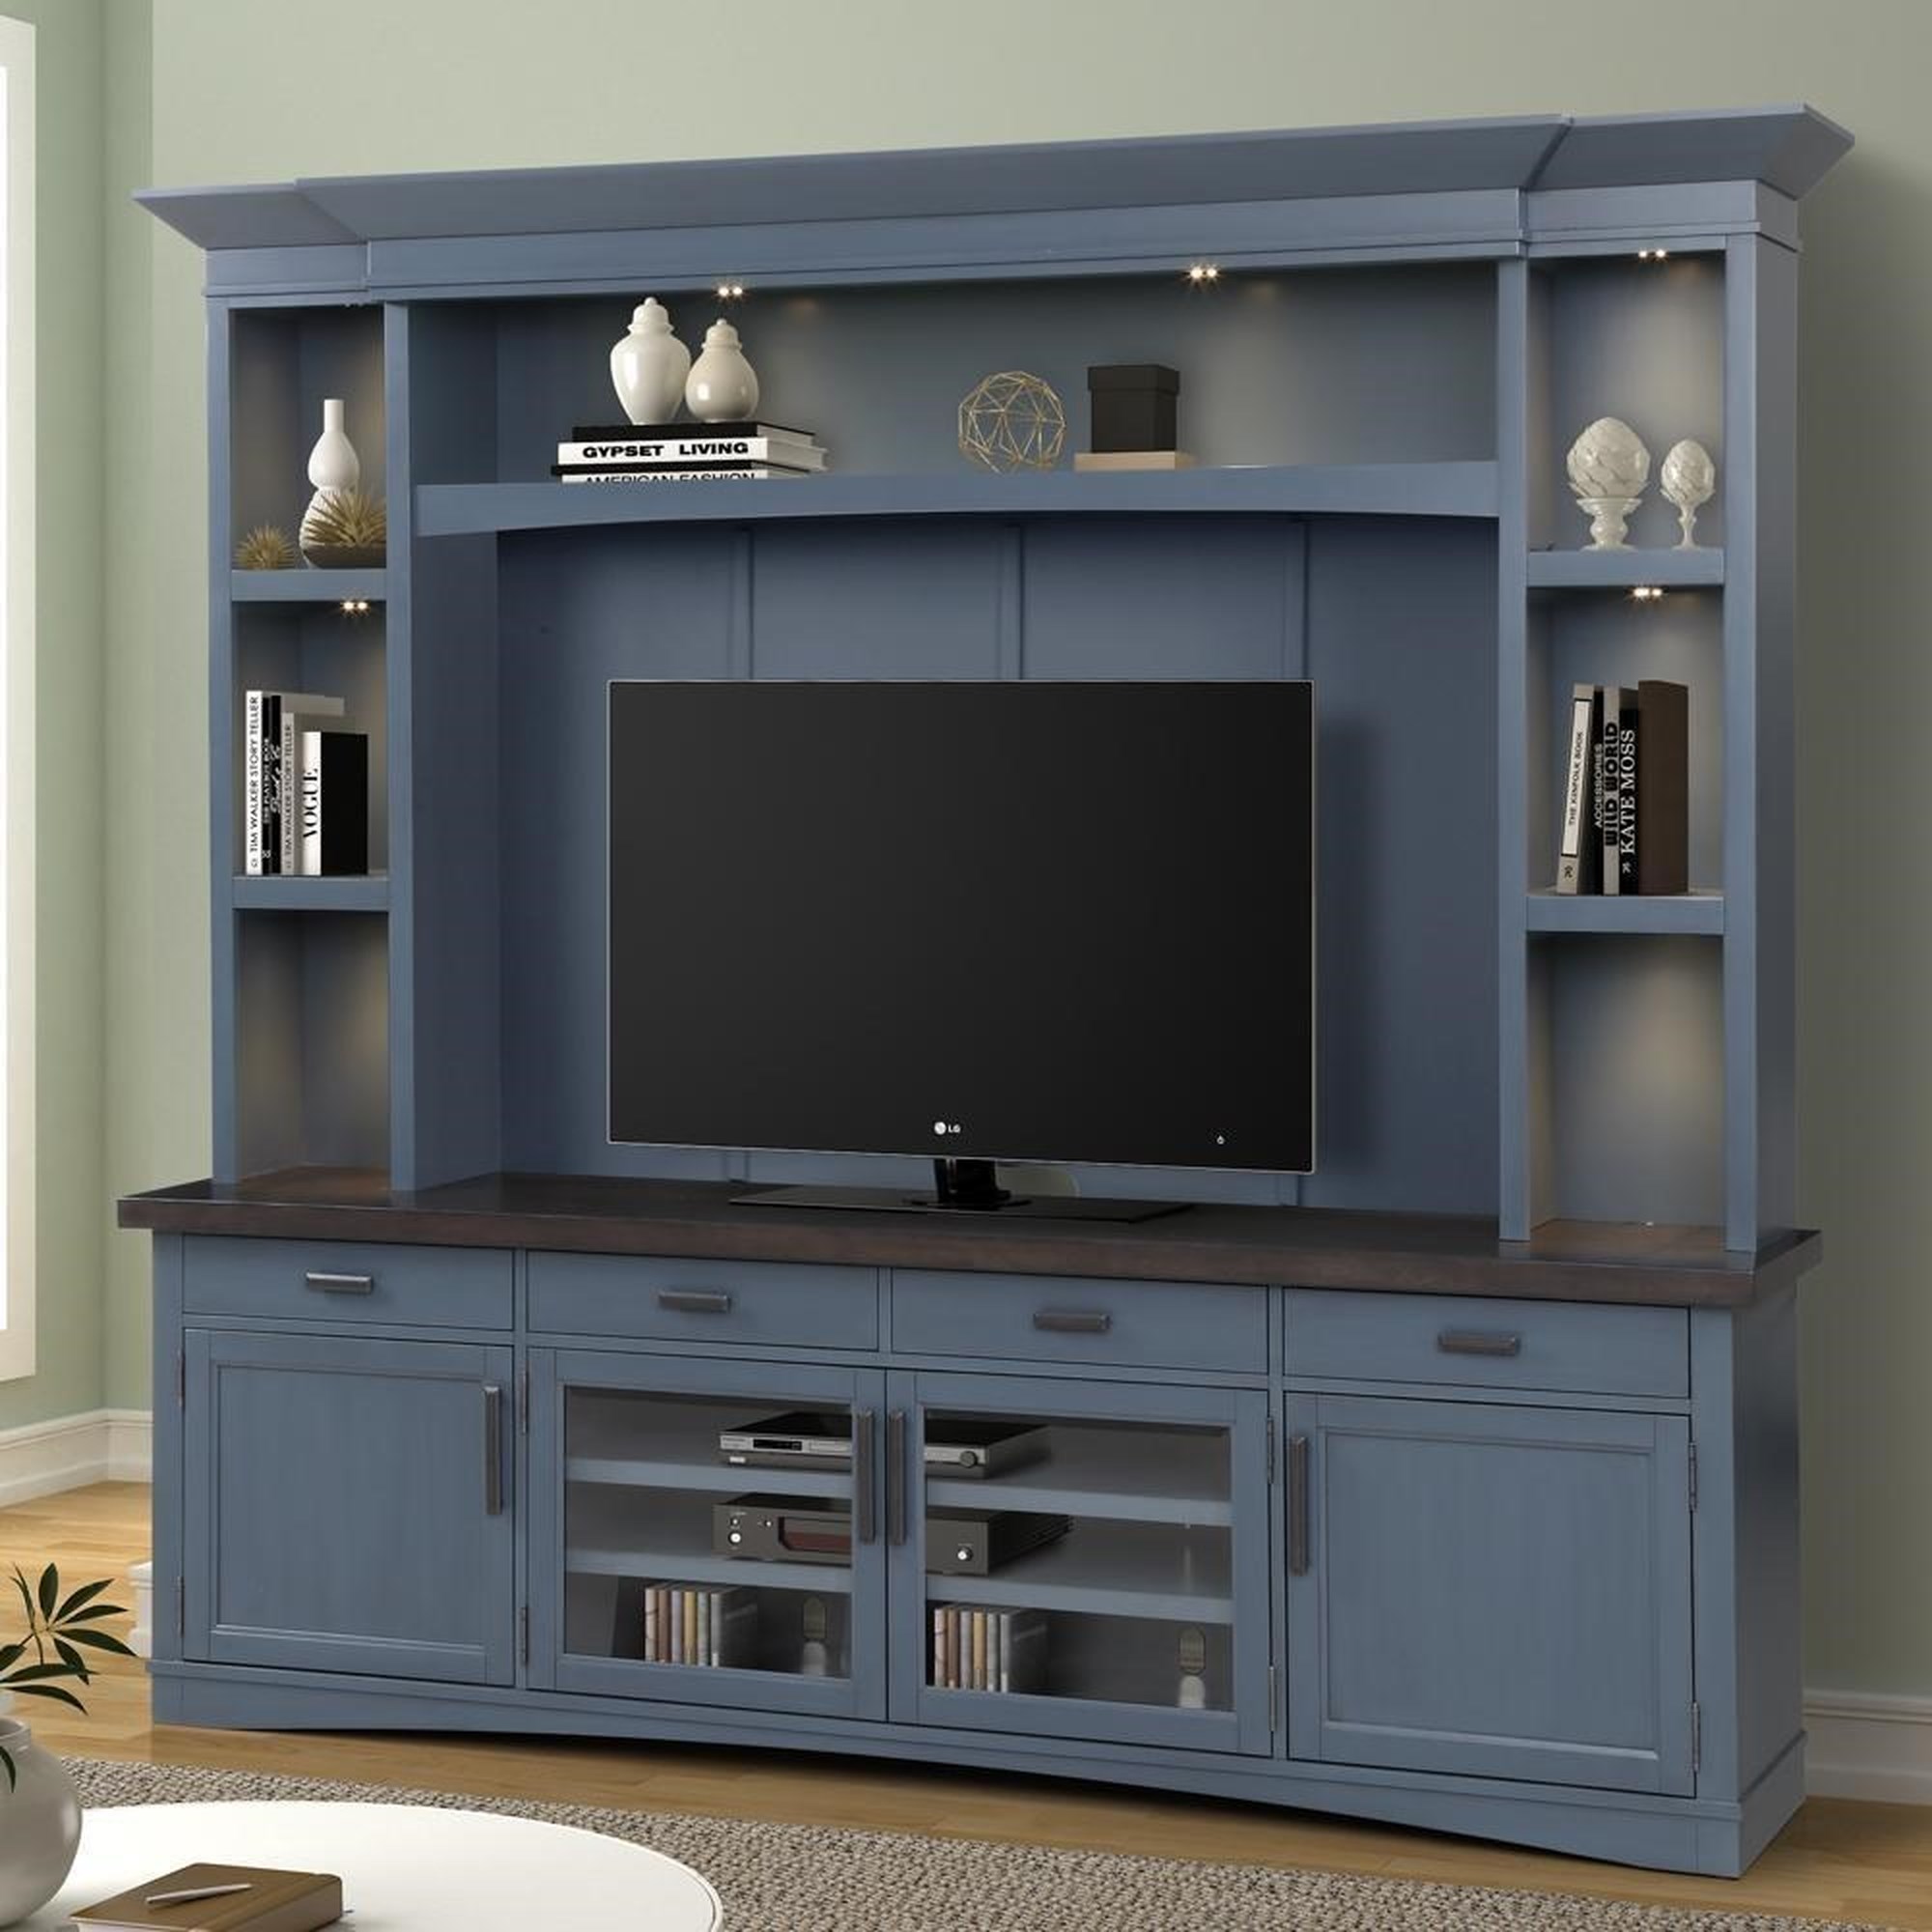 Paramount Furniture Americana Modern AME#92-4-DEN Entertainment Wall Unit  with LED Lights, Reeds Furniture